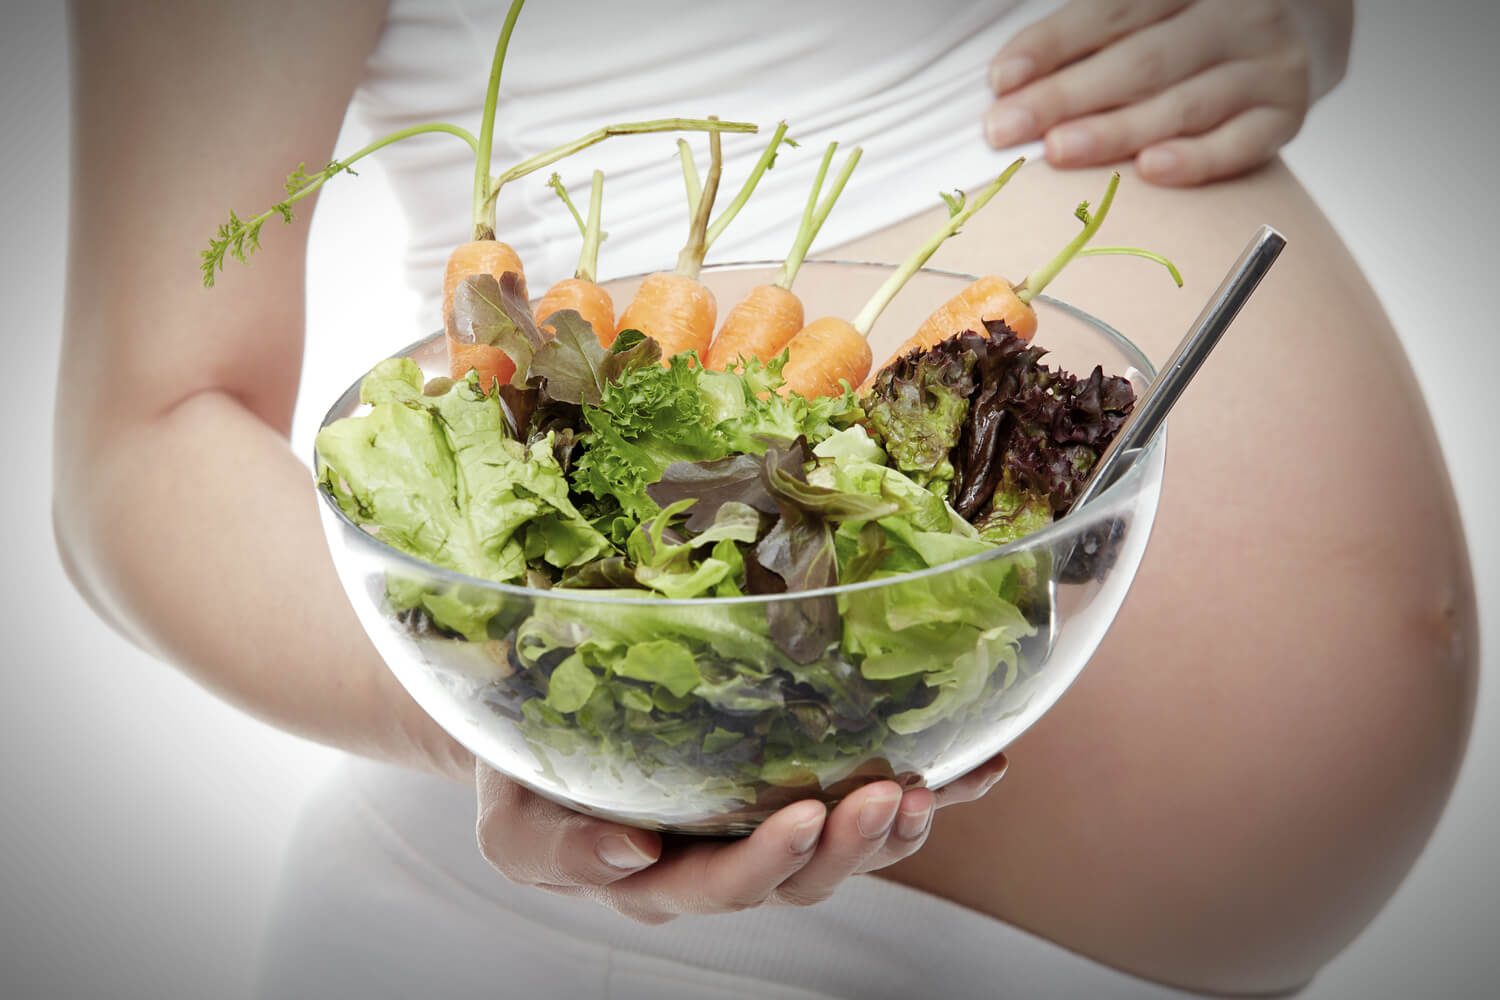 Nutritional Benefits of Eating Lettuce During Pregnancy